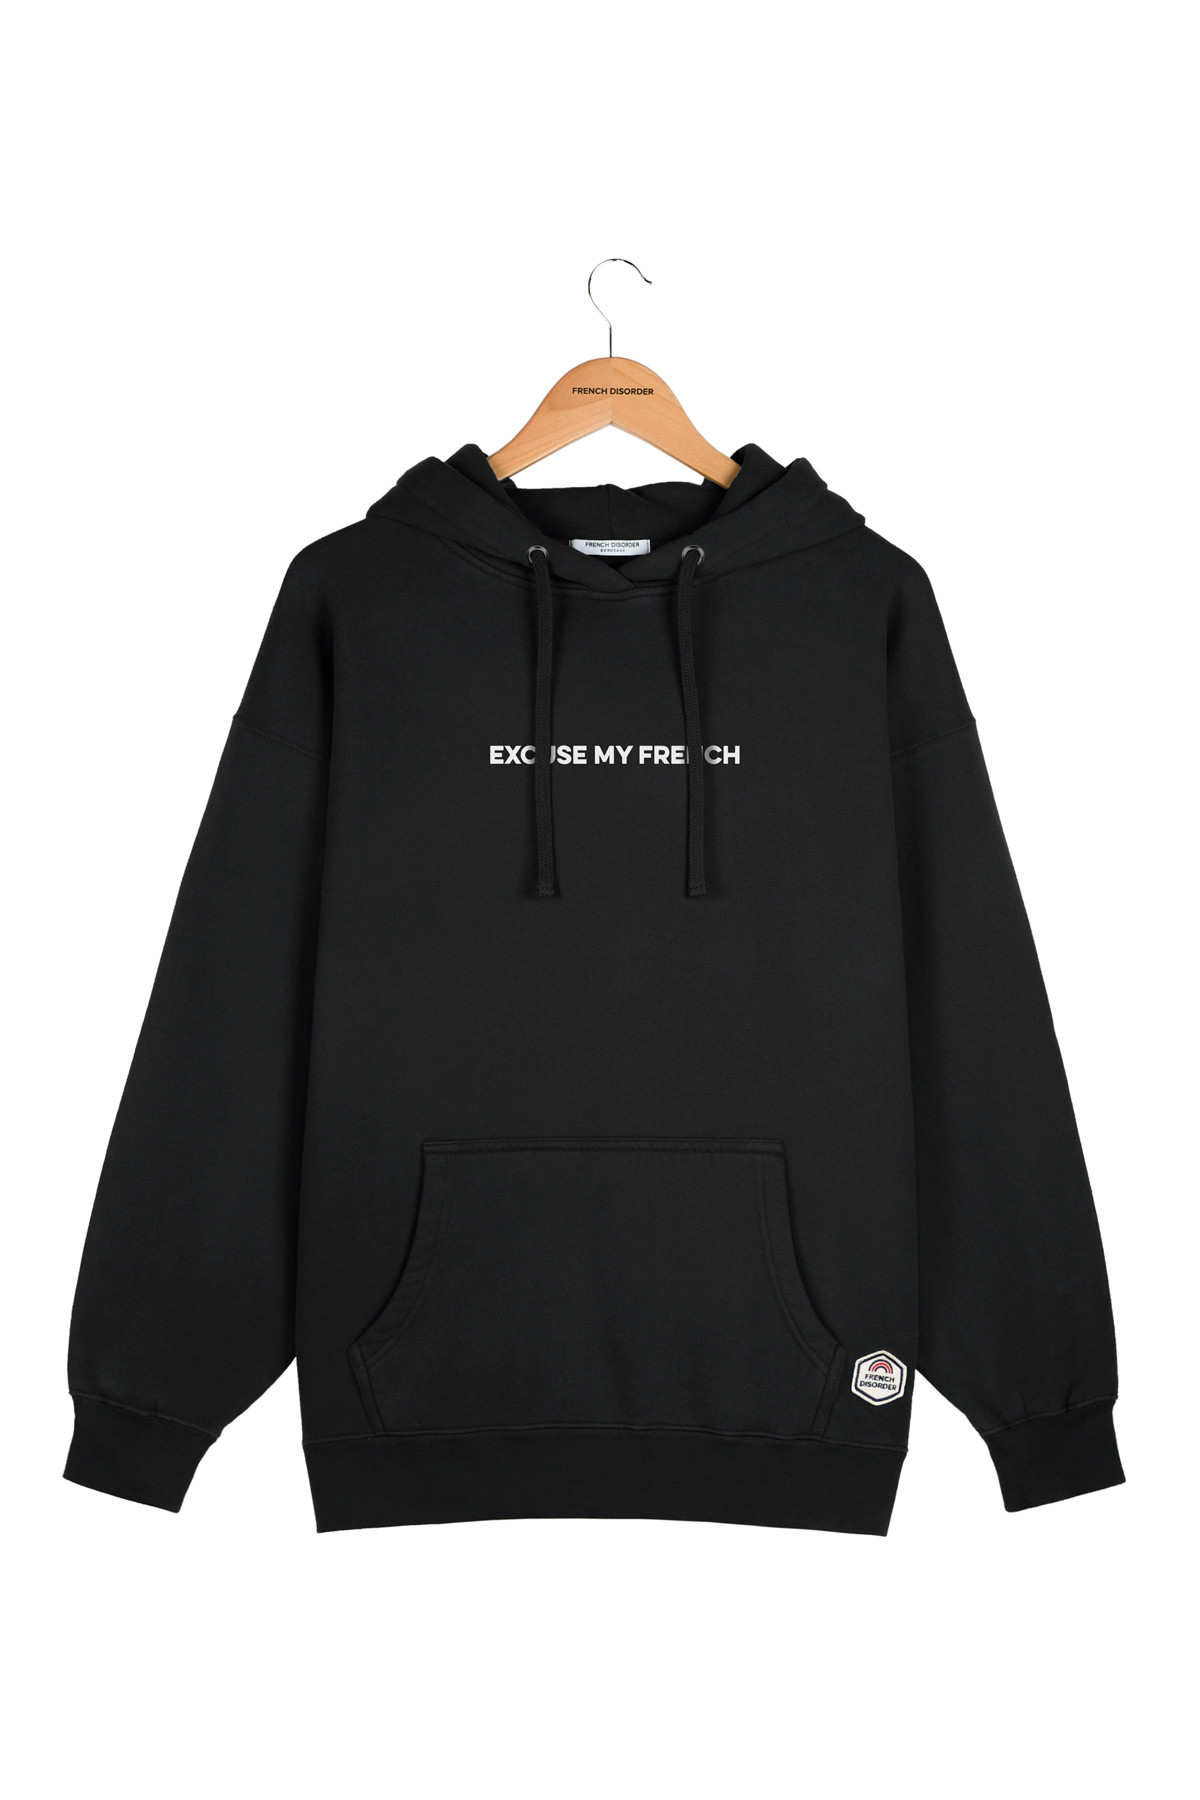 Photo de SWEATS À CAPUCHE Hoodie EXCUSE MY FRENCH chez French Disorder